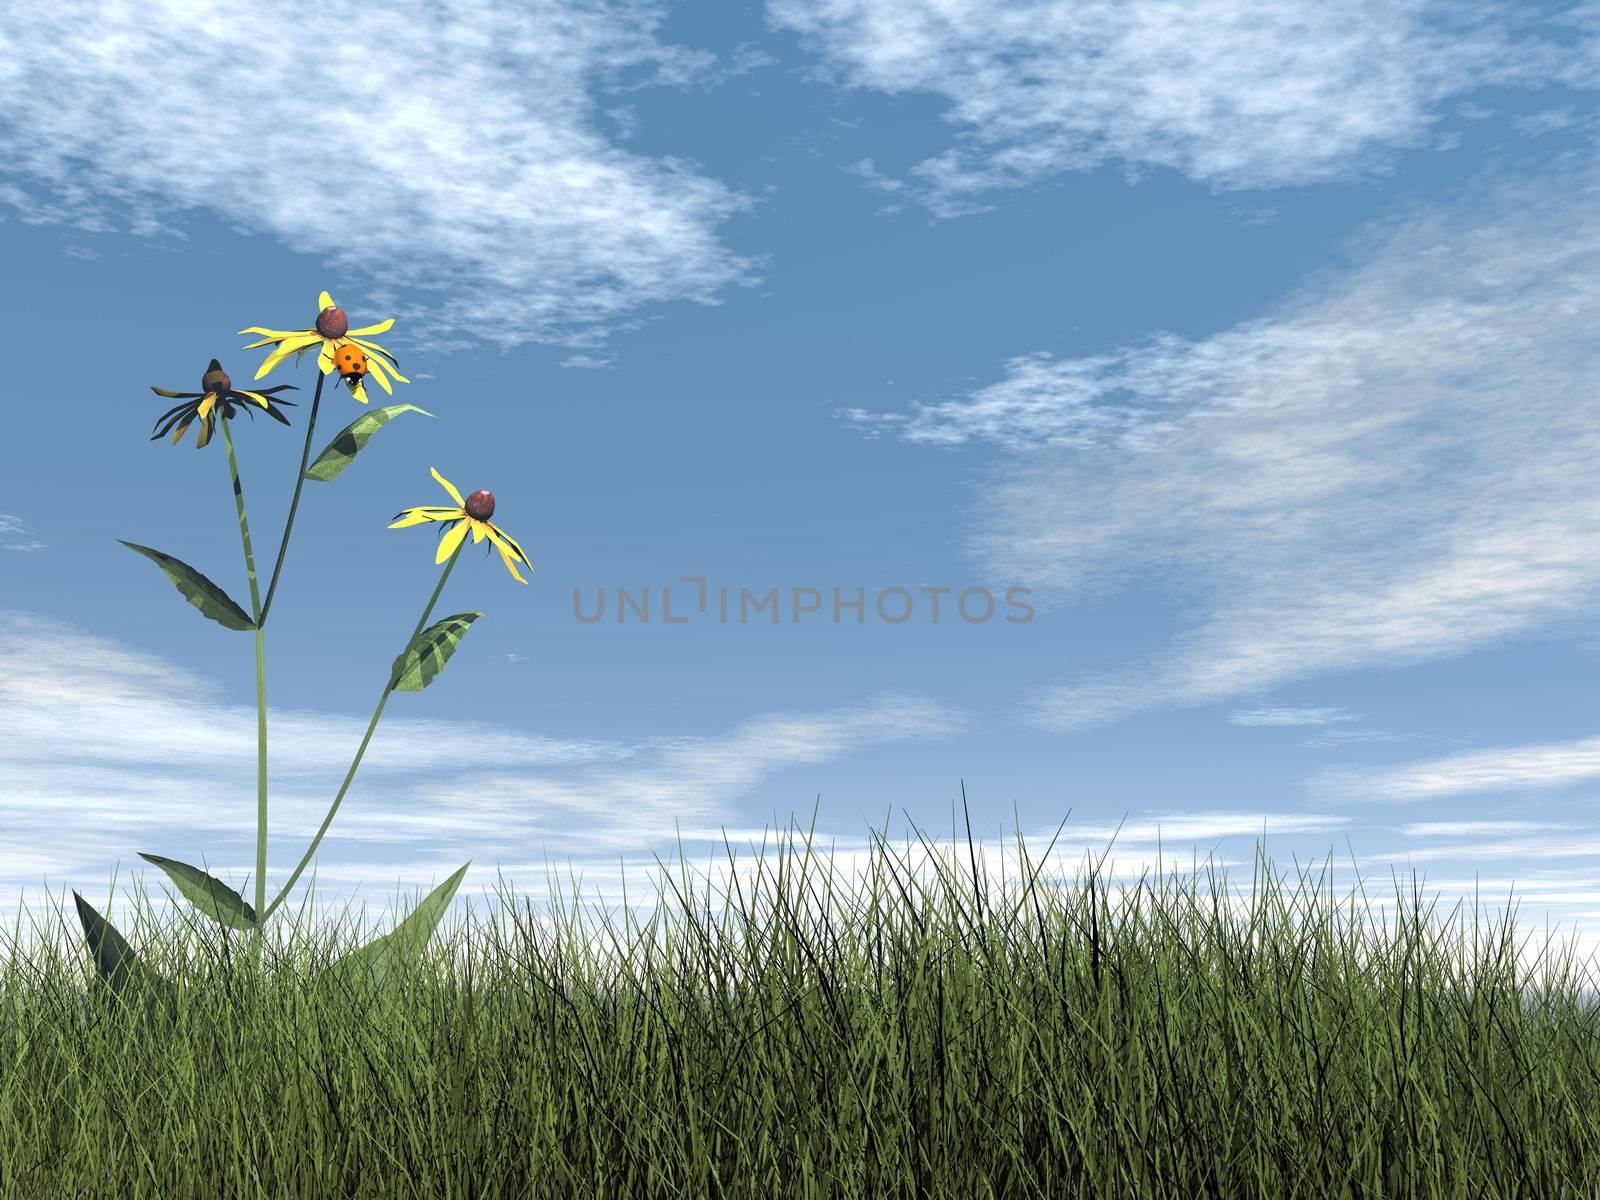 Ladybird on a flower in a meadow by day - 3D render